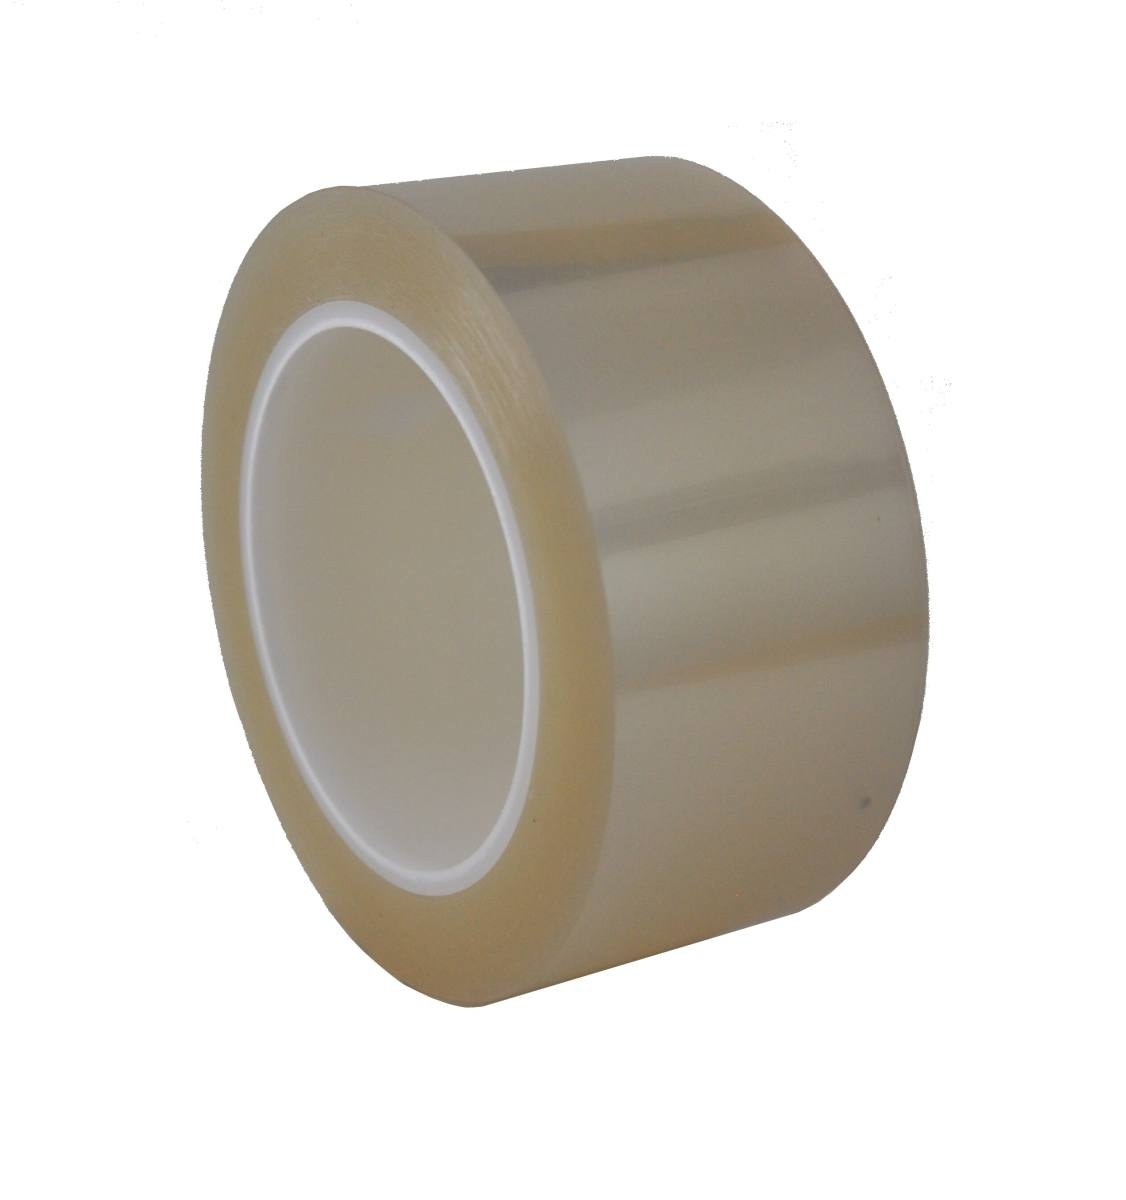 SKS fluorosilicone film, polyester film 0.075mm, 300mmx100m, coated on one side with fluorosilicone, transparent